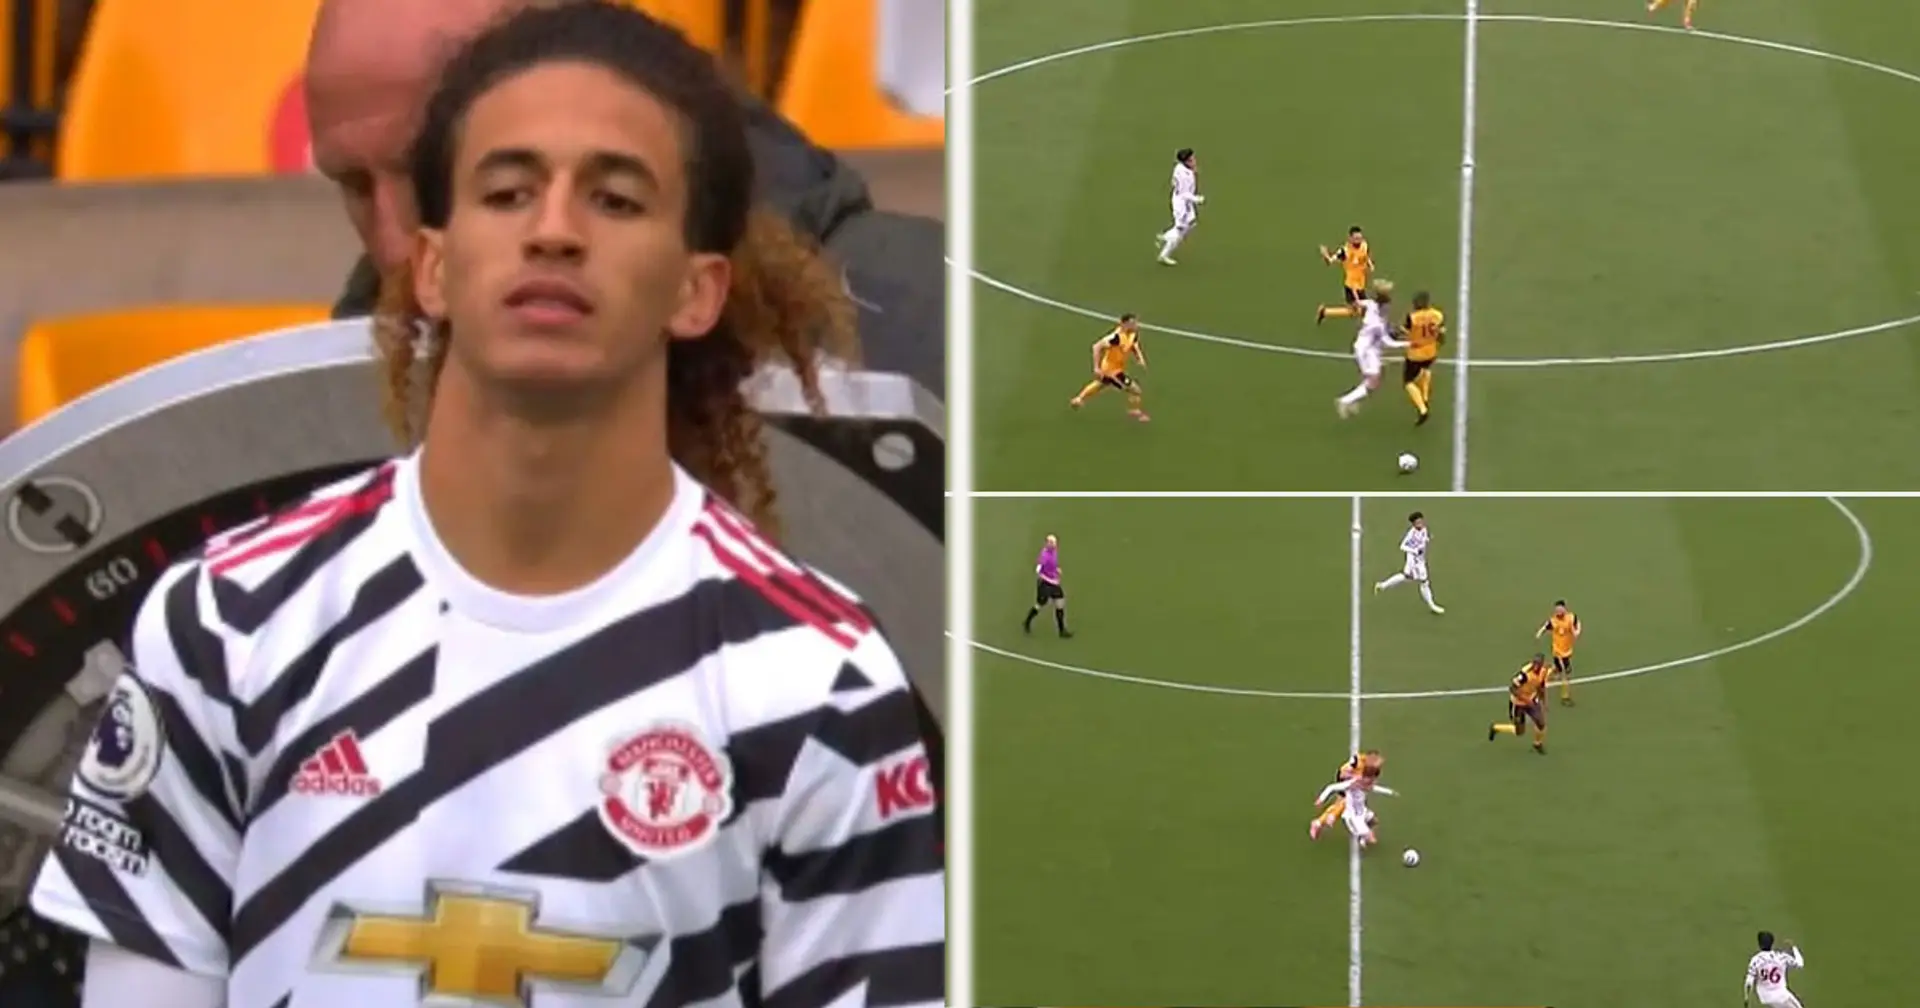 Hannibal embarrasses Wolves defender with brilliant nutmeg in United debut